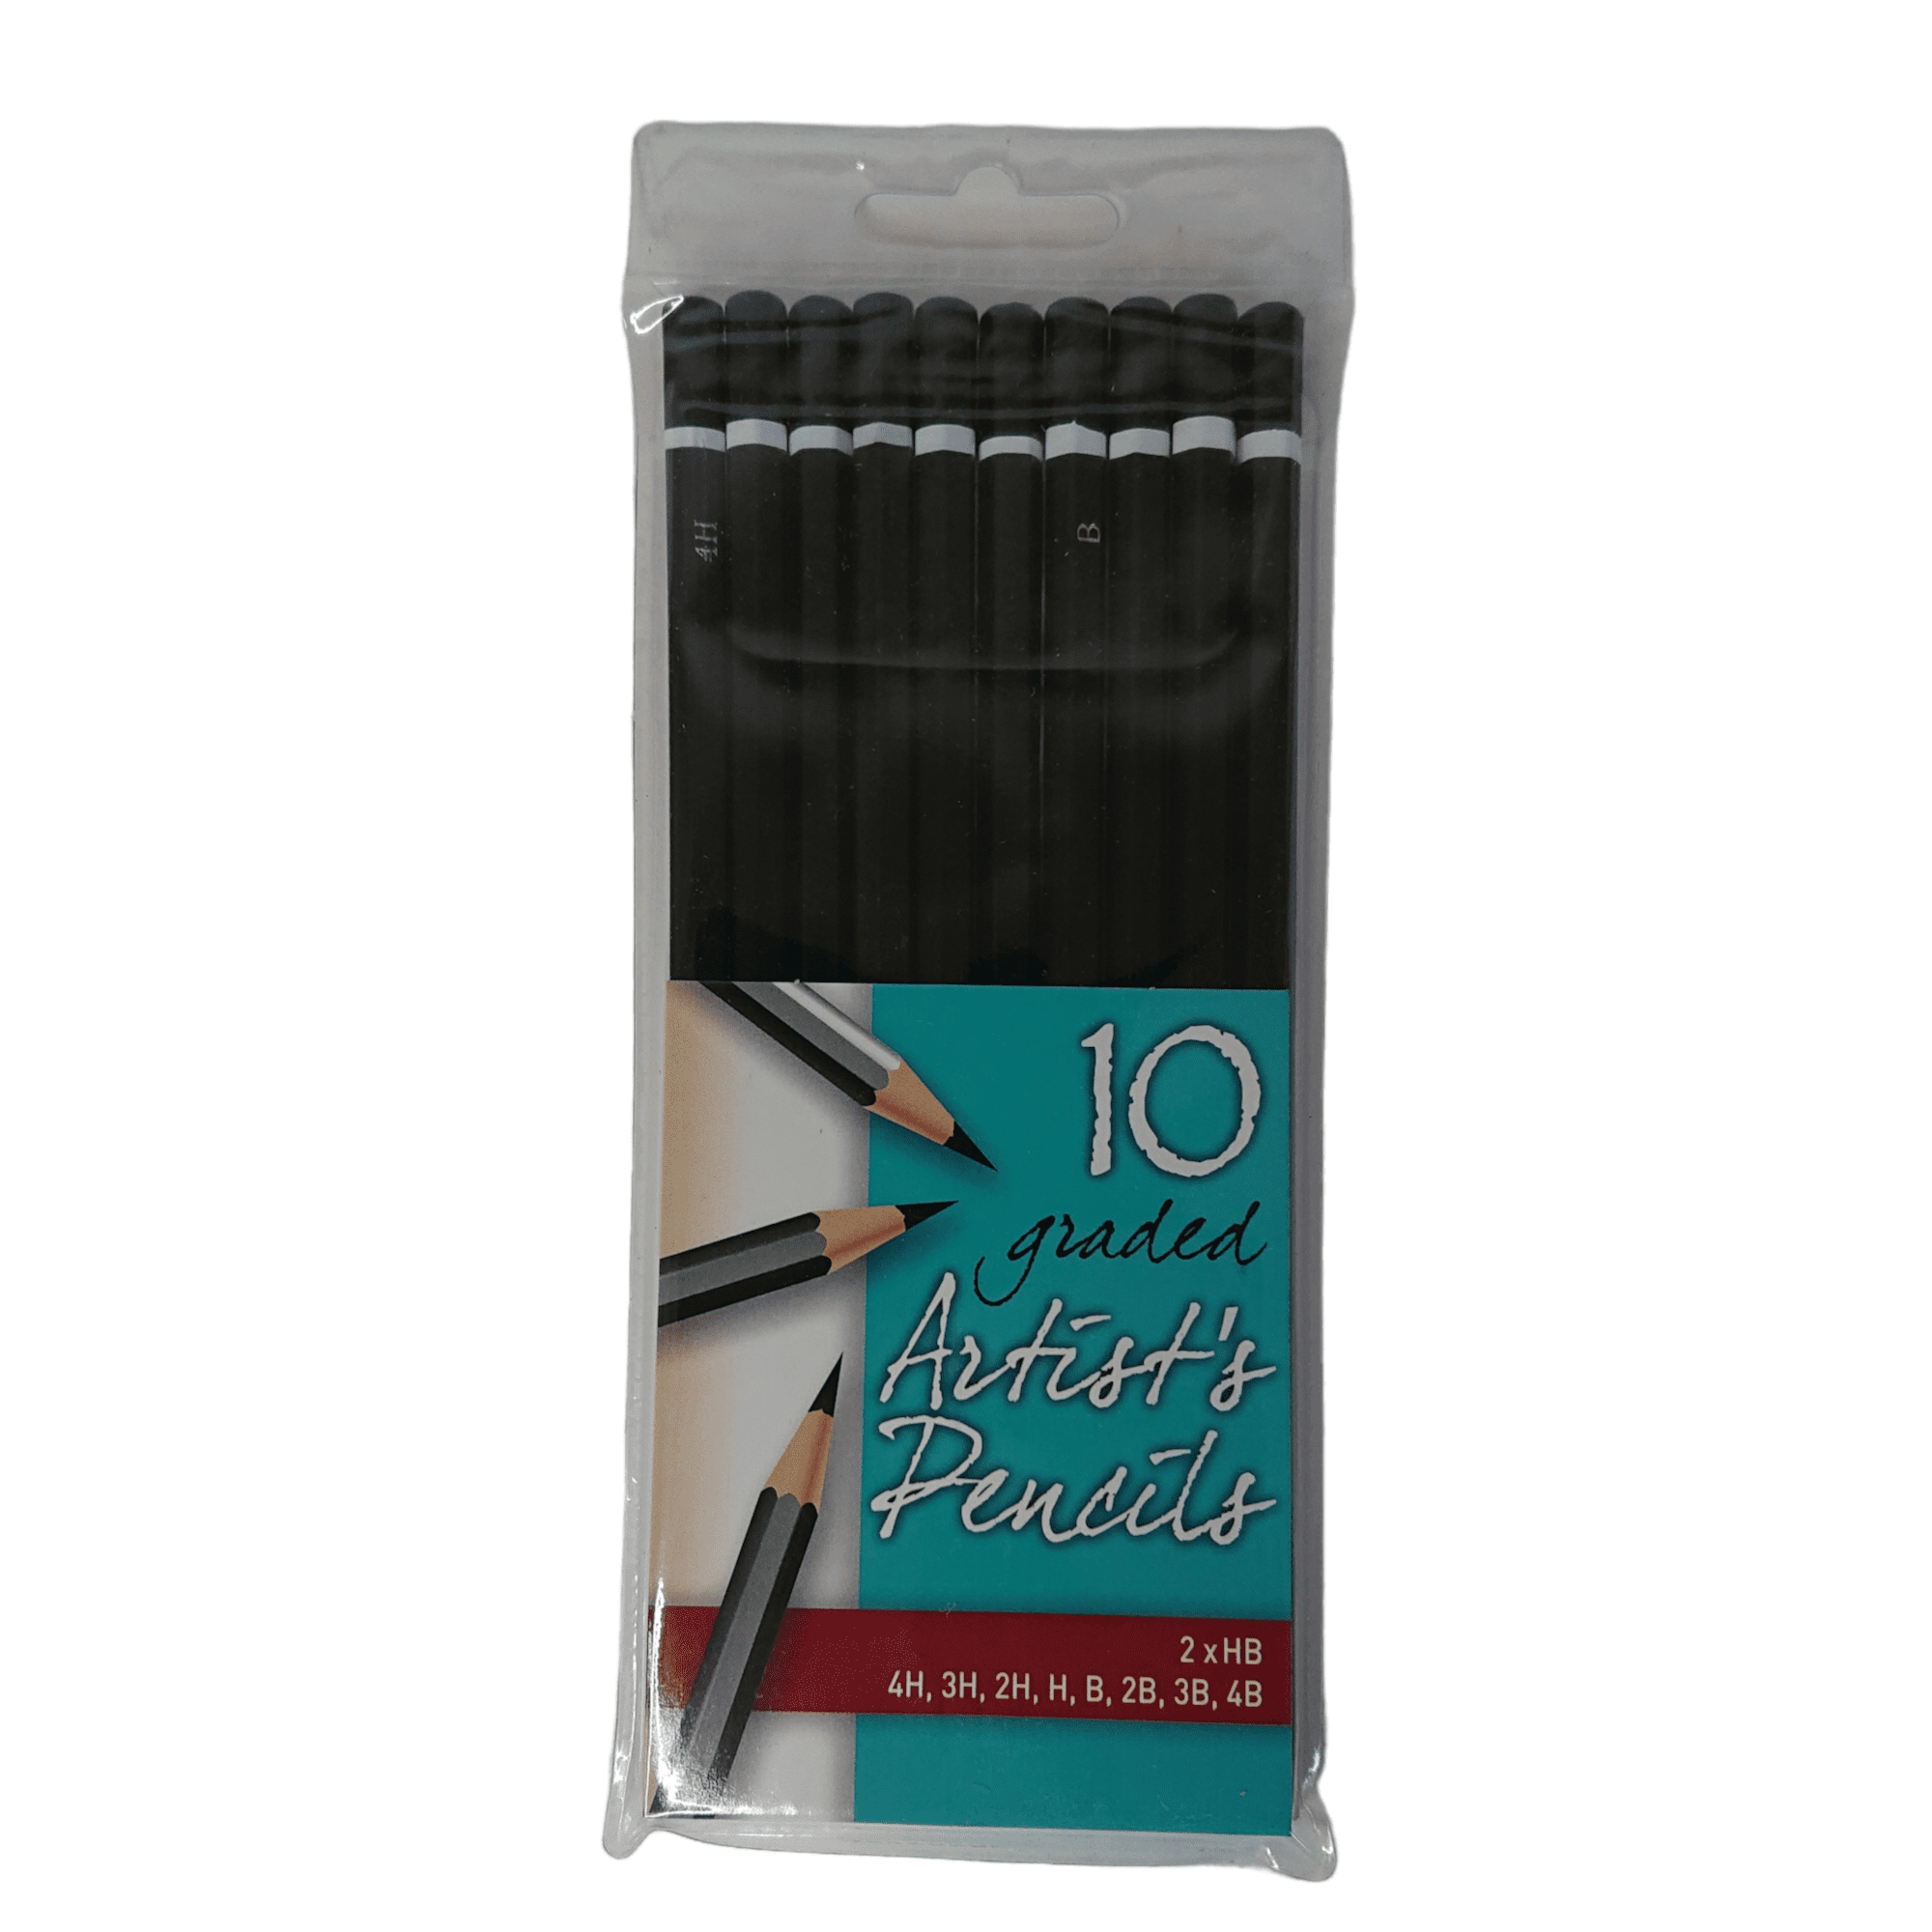 set of 10 graded artist's pencils 4H to 4B with 2 HB